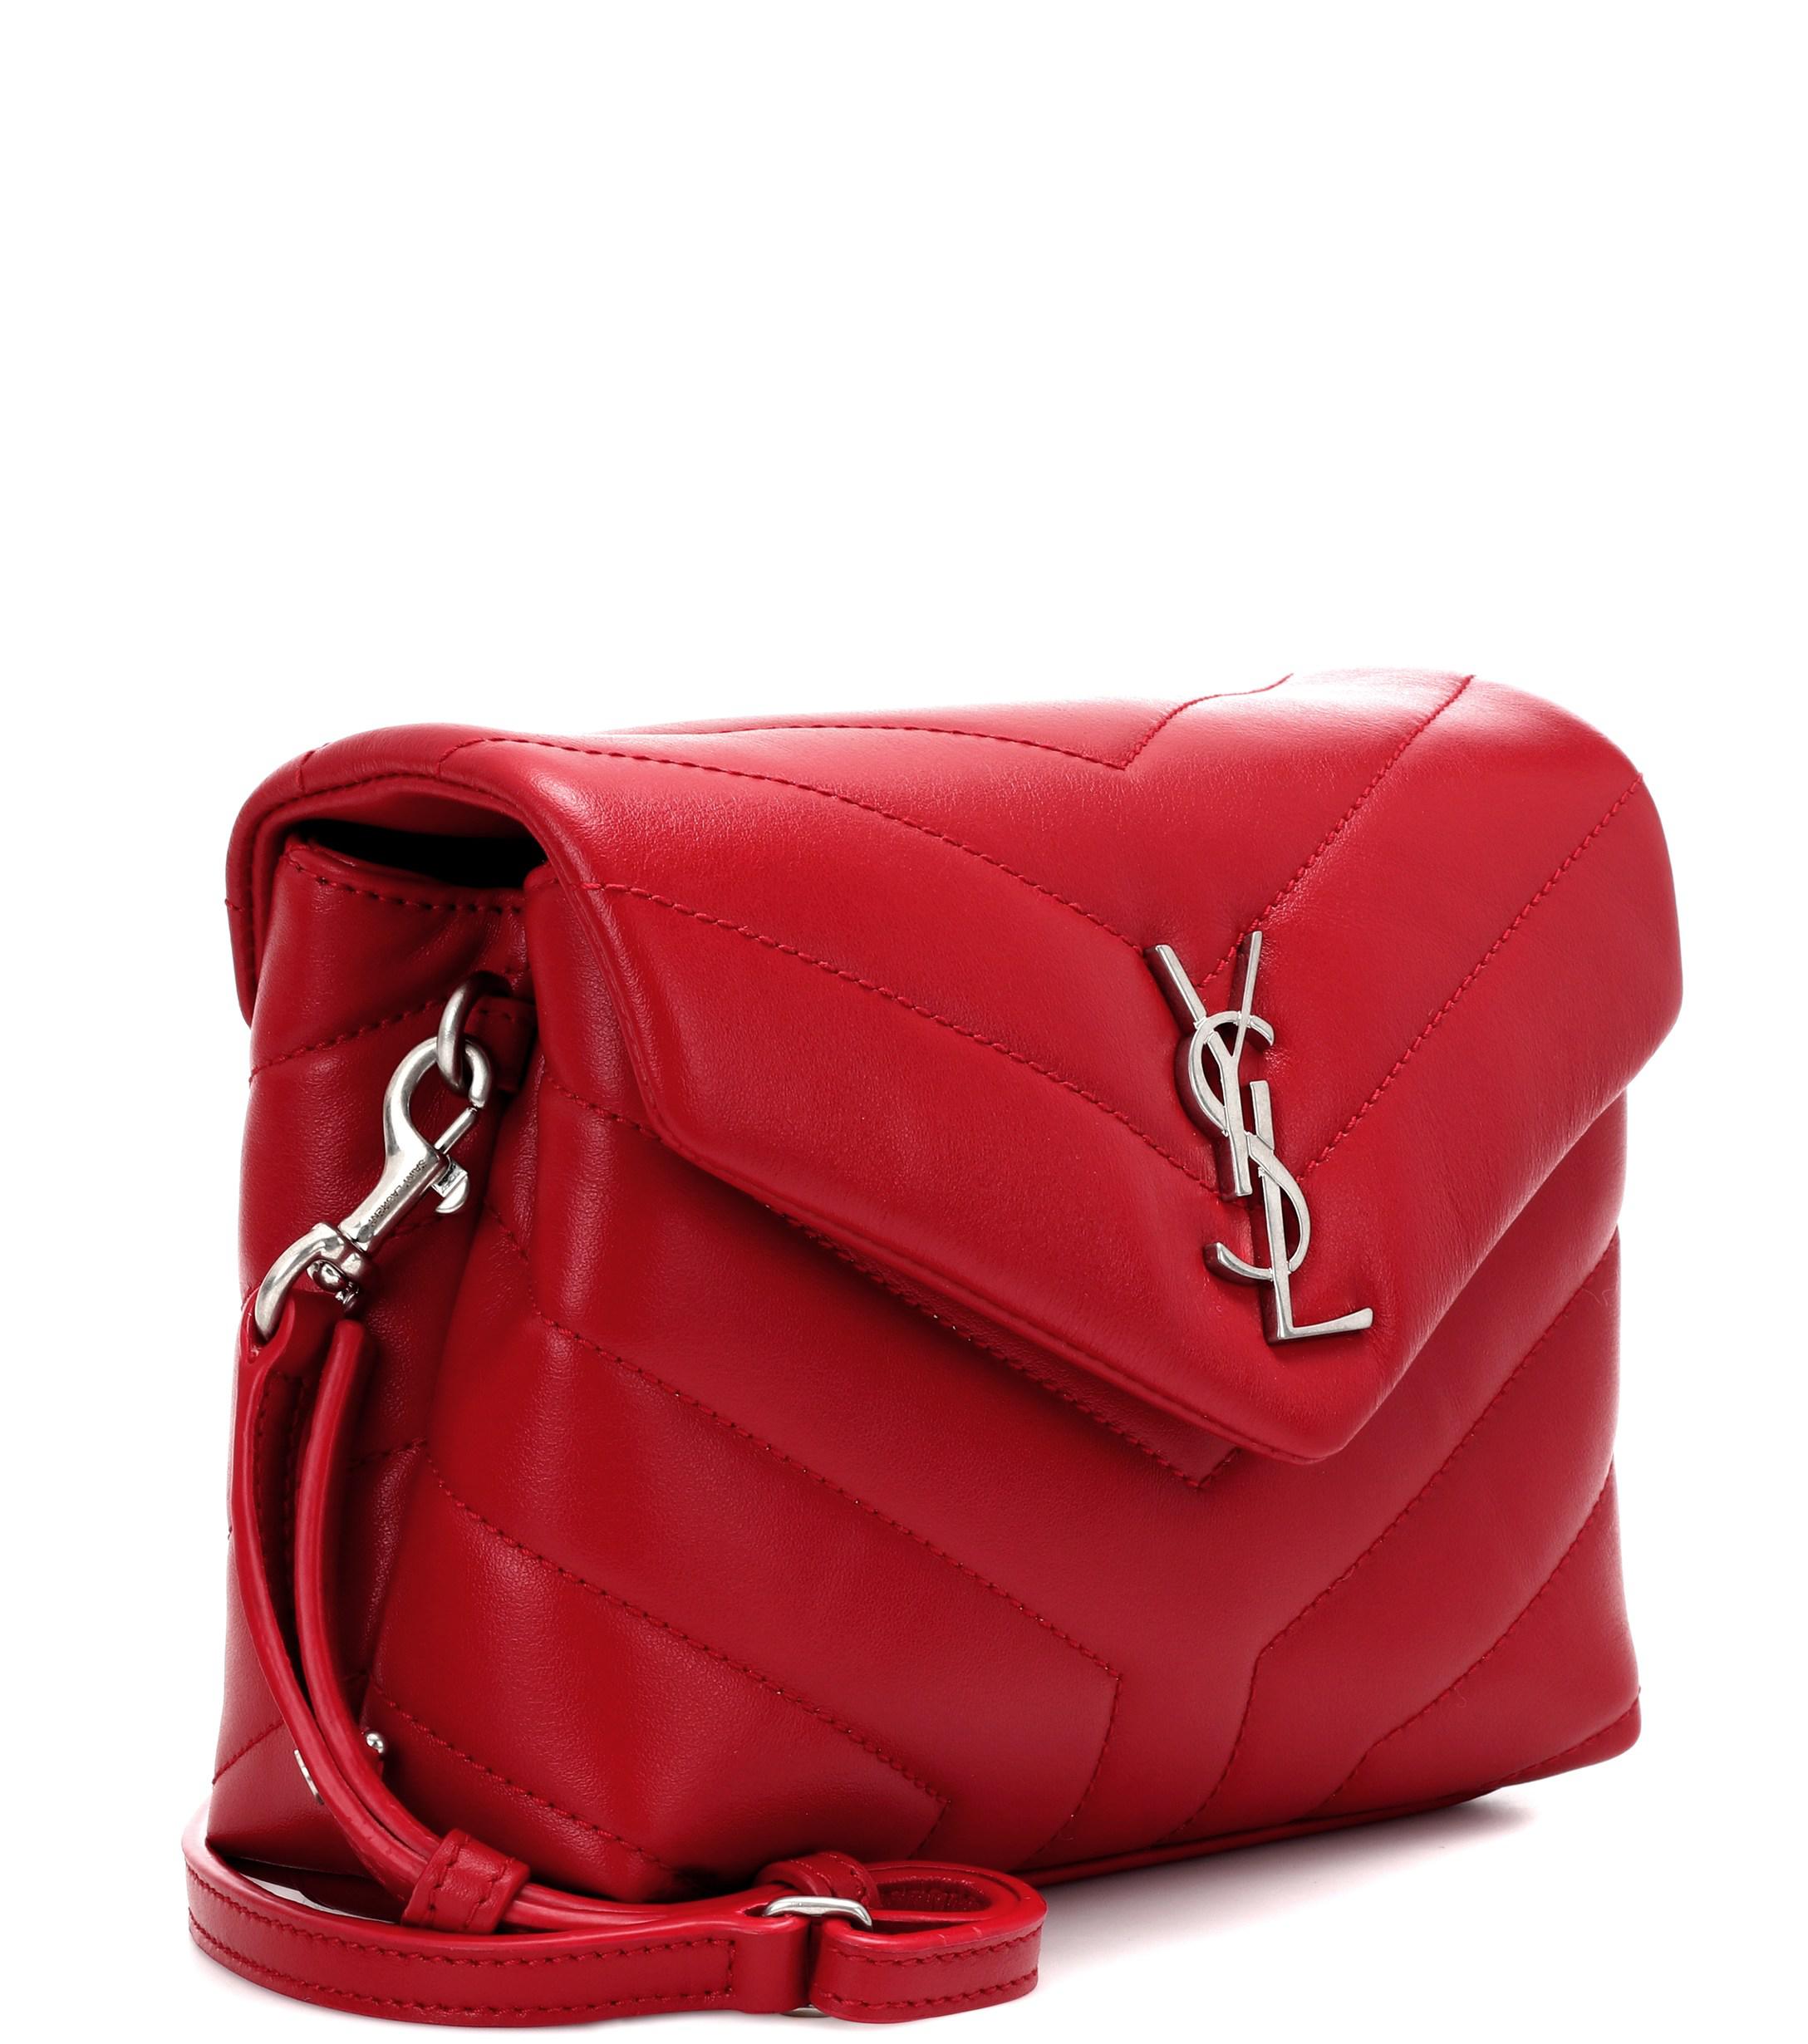 Saint Laurent Toy Loulou Leather Shoulder Bag in Red - Lyst